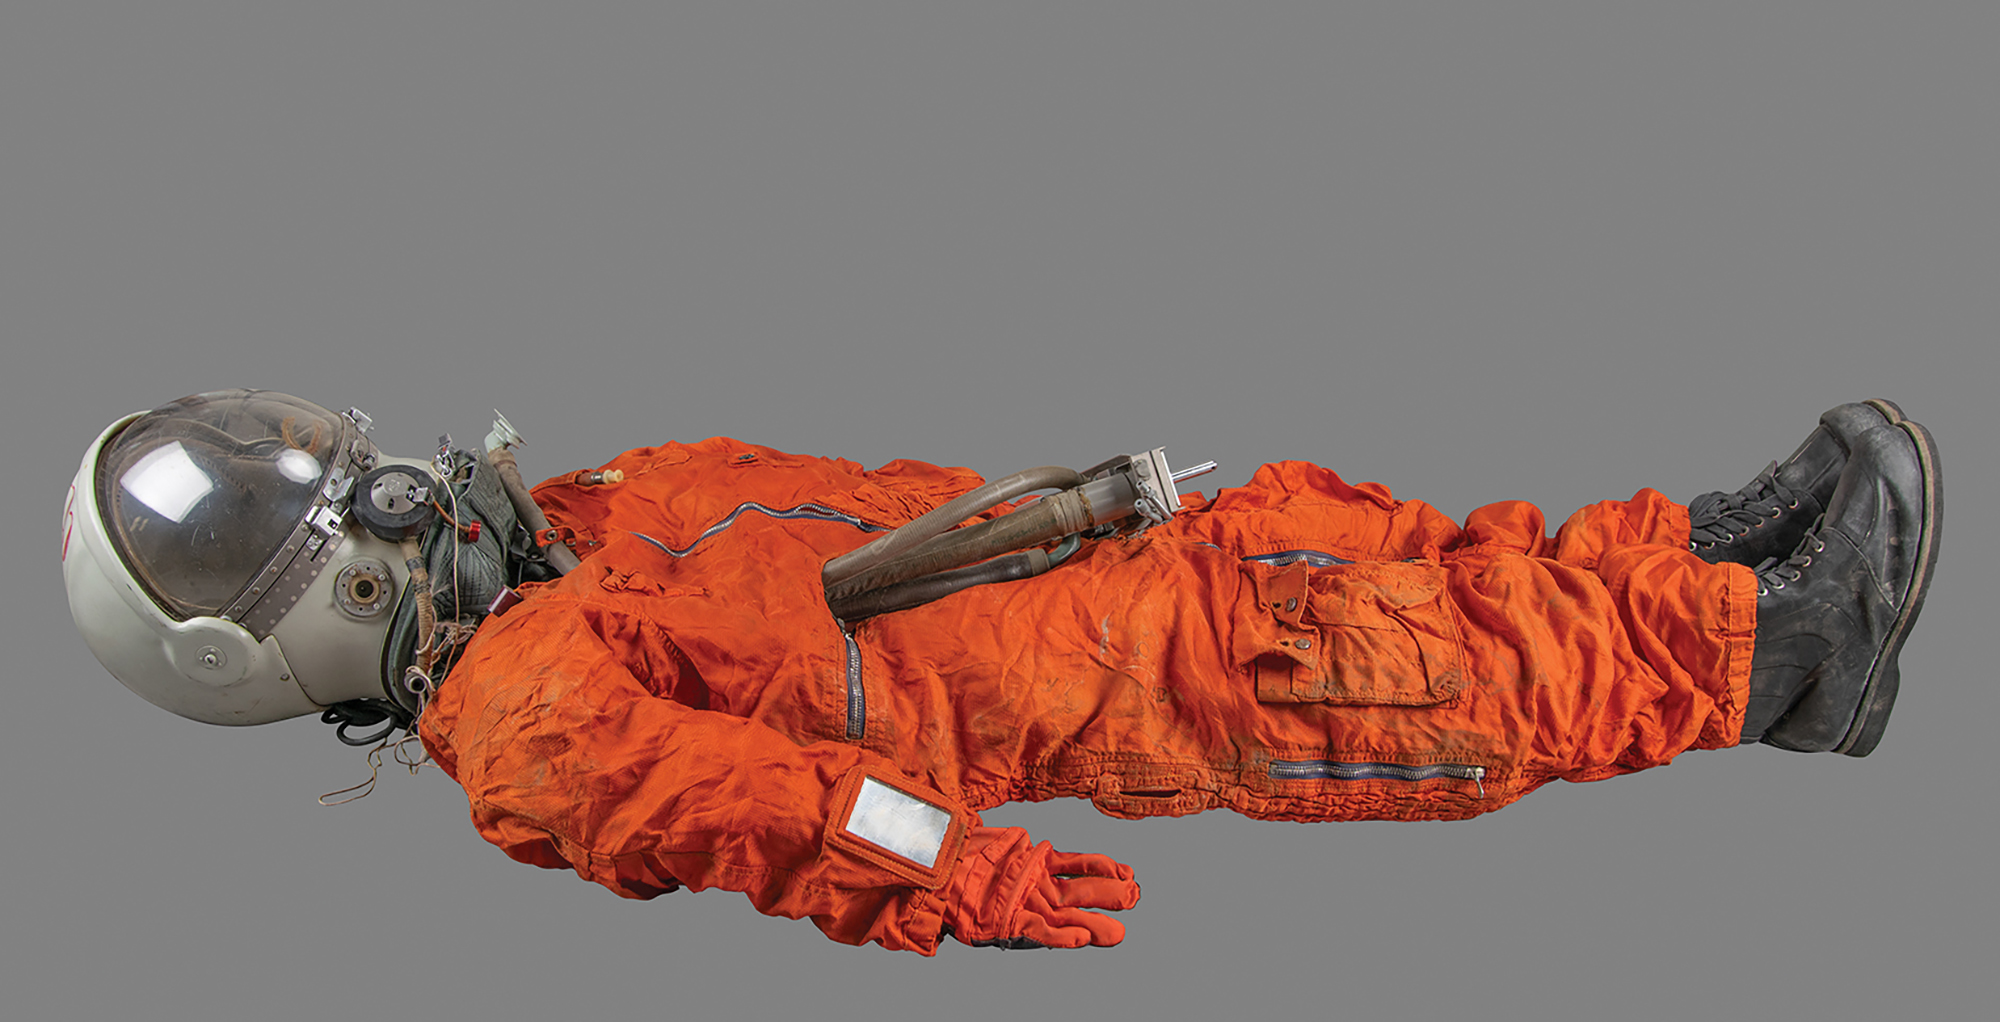 Lot #9617 Cosmonaut SK-1 Vostok Suit Assembly Prototype or Display - Image 3